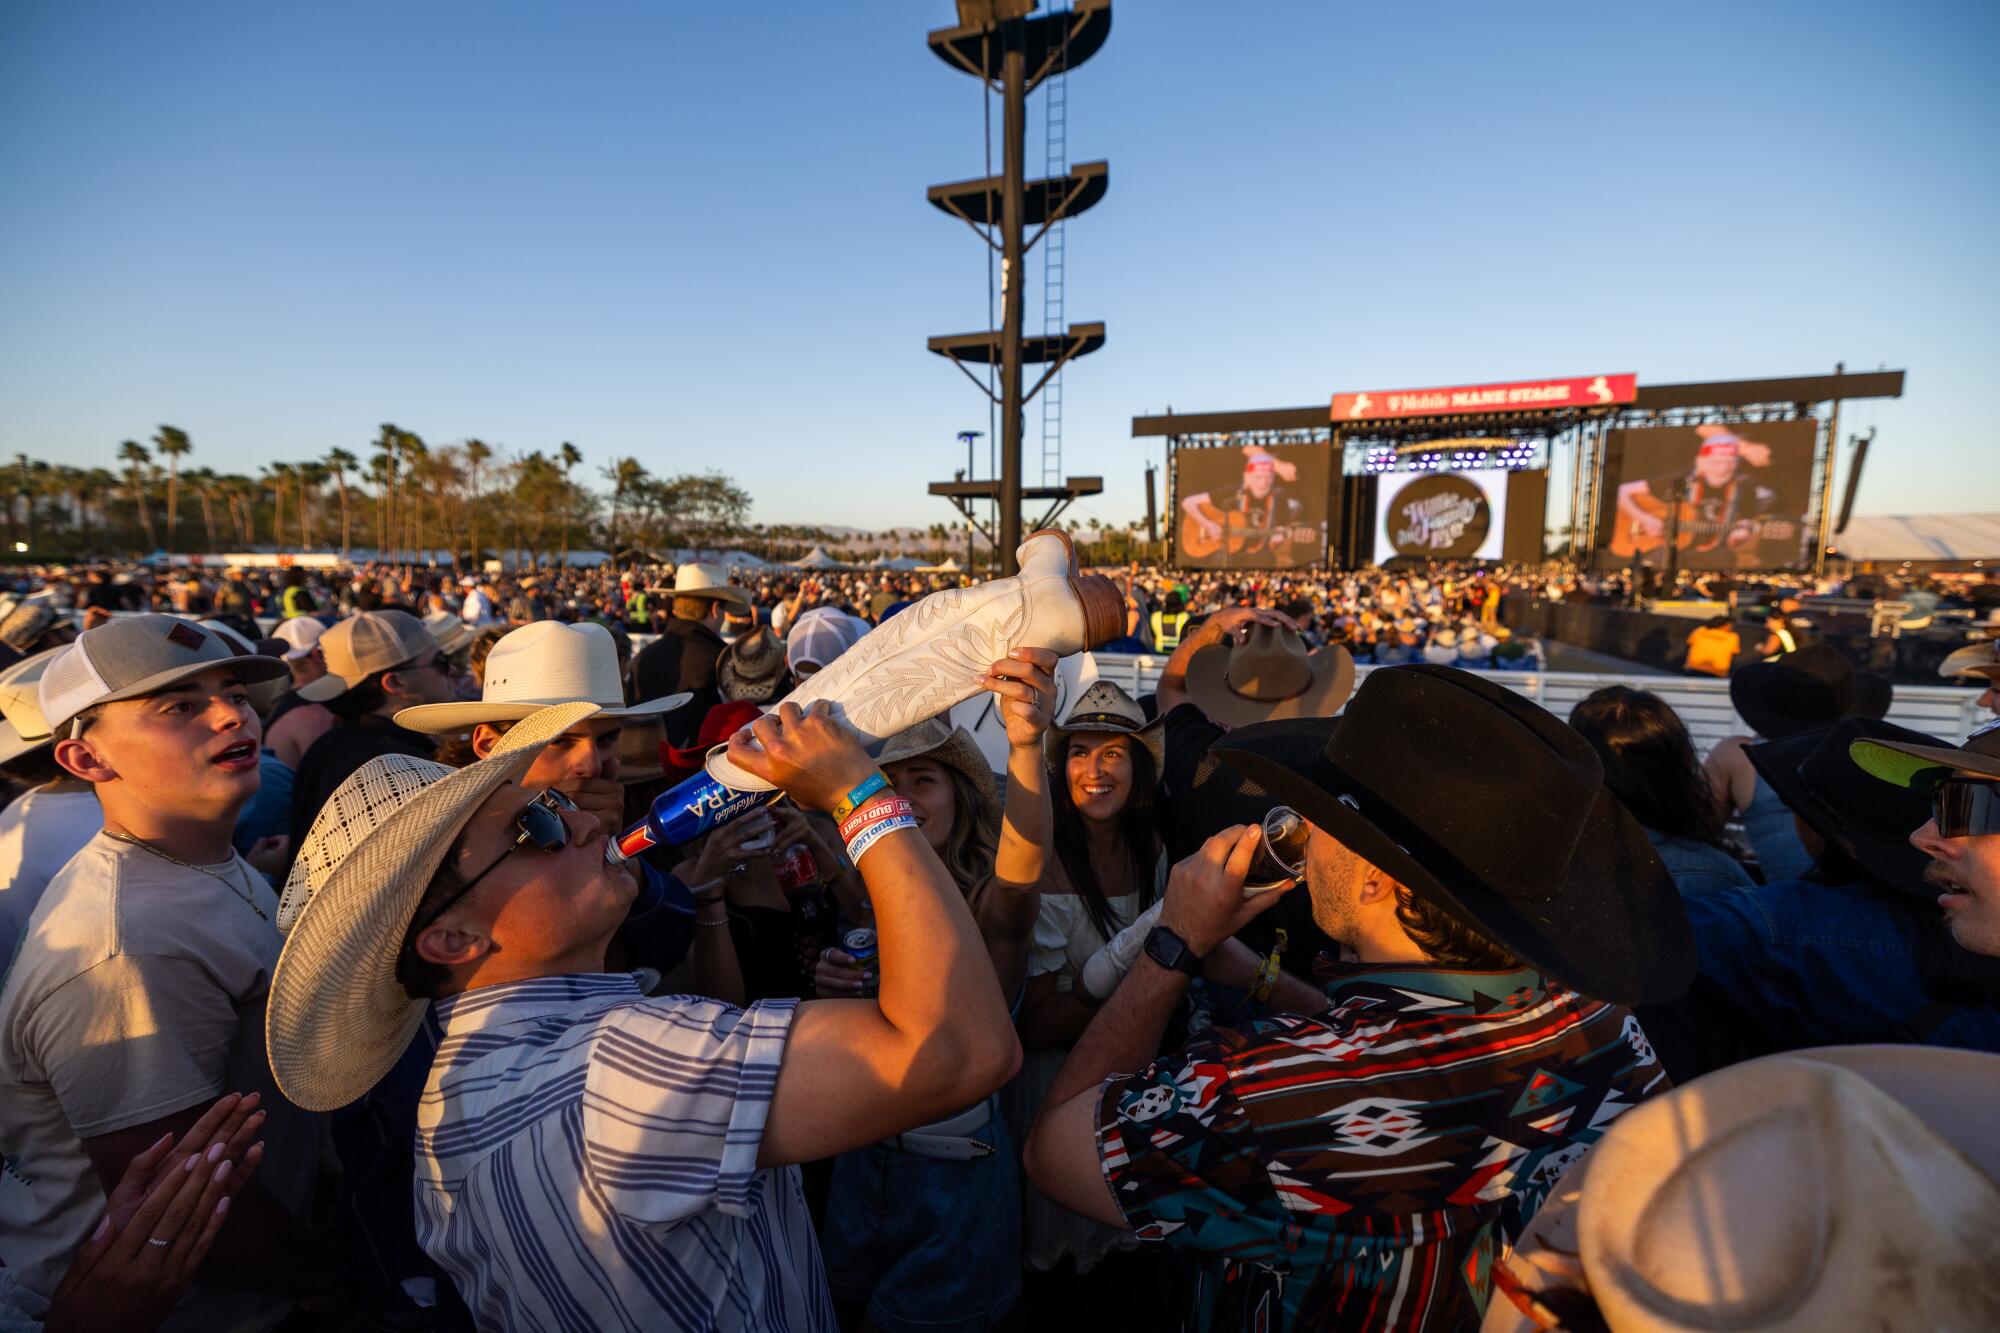 A man drinks a beer from a women's boot while watching Willie Nelson & Family perform.